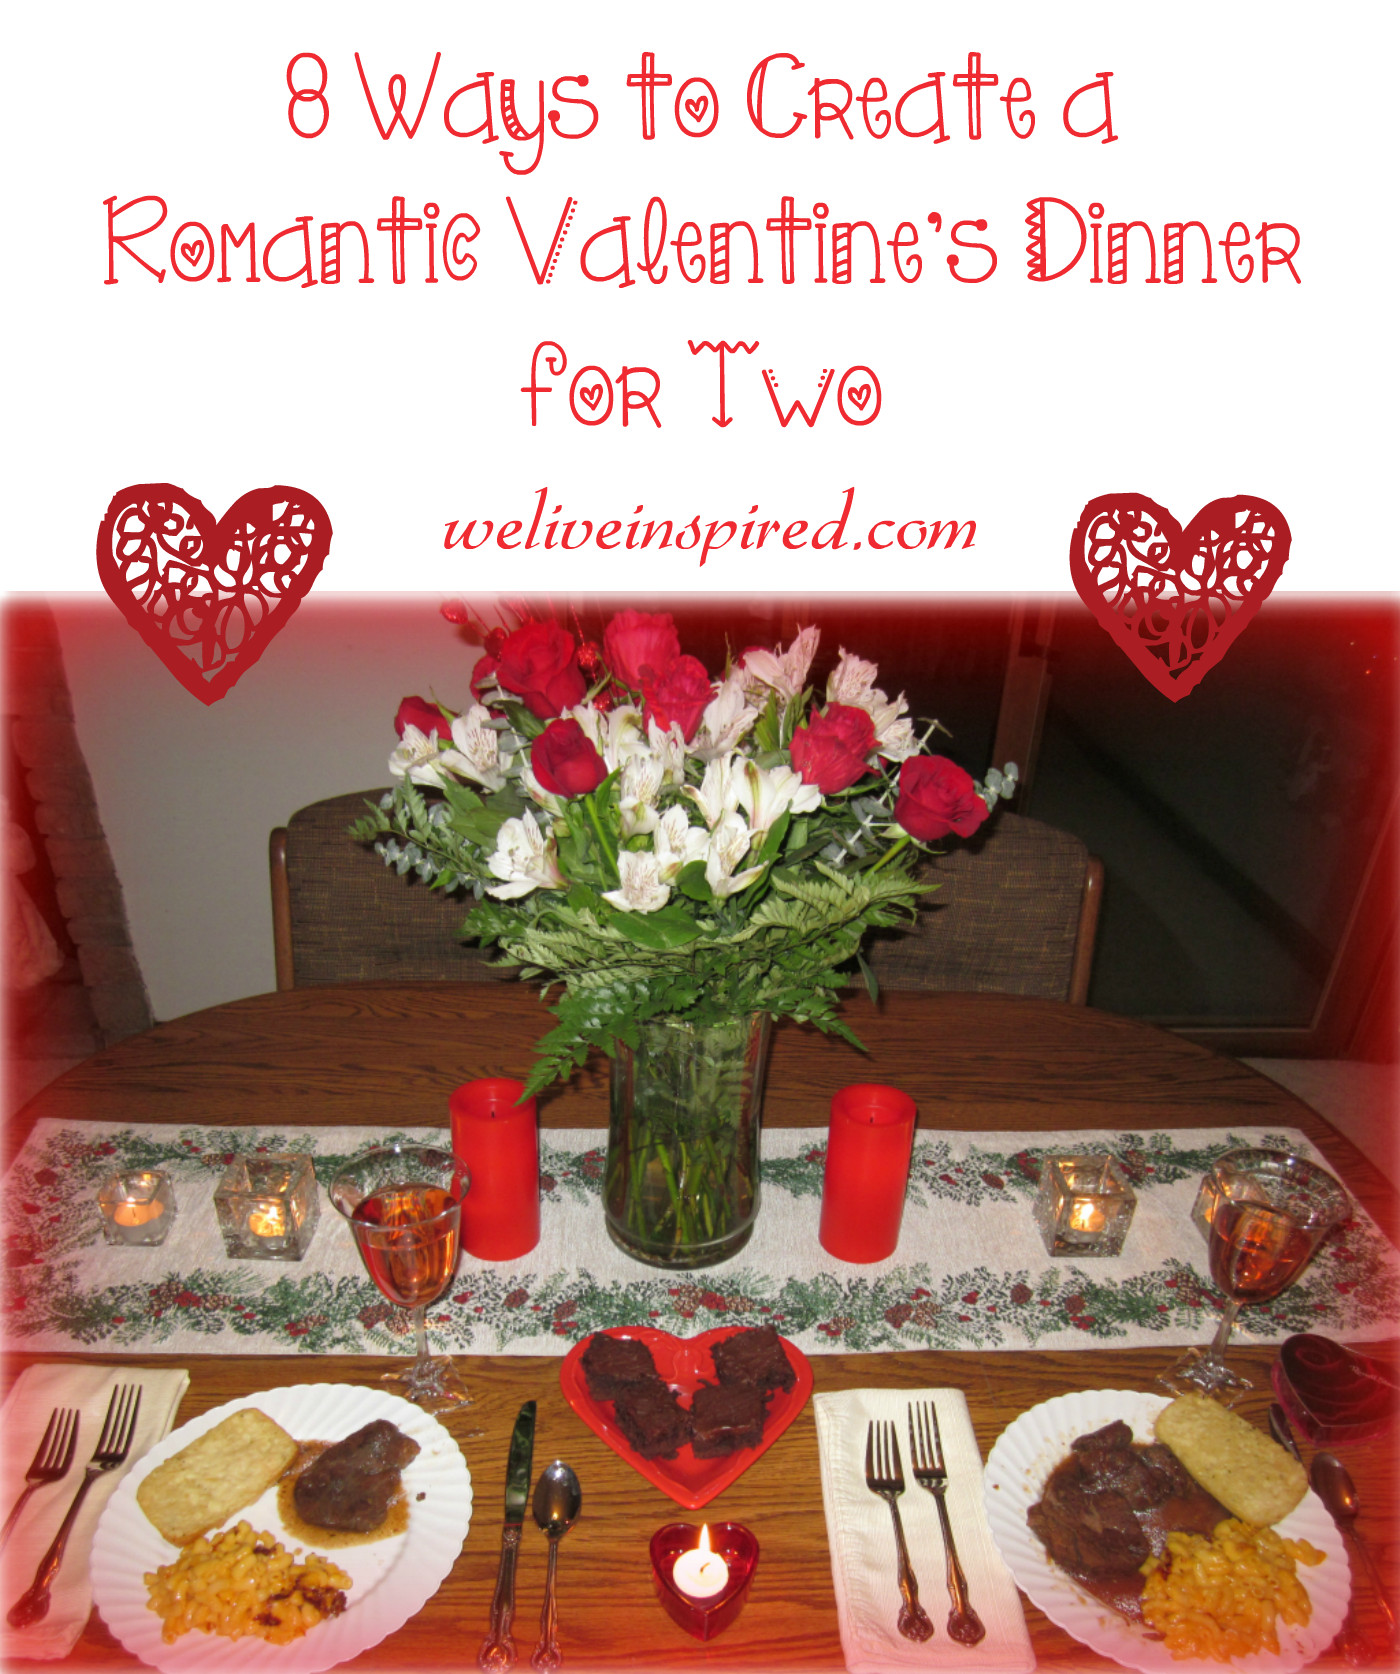 Valentines Dinners At Home
 8 Ways to Create a Romantic Valentine s Day Dinner for Two